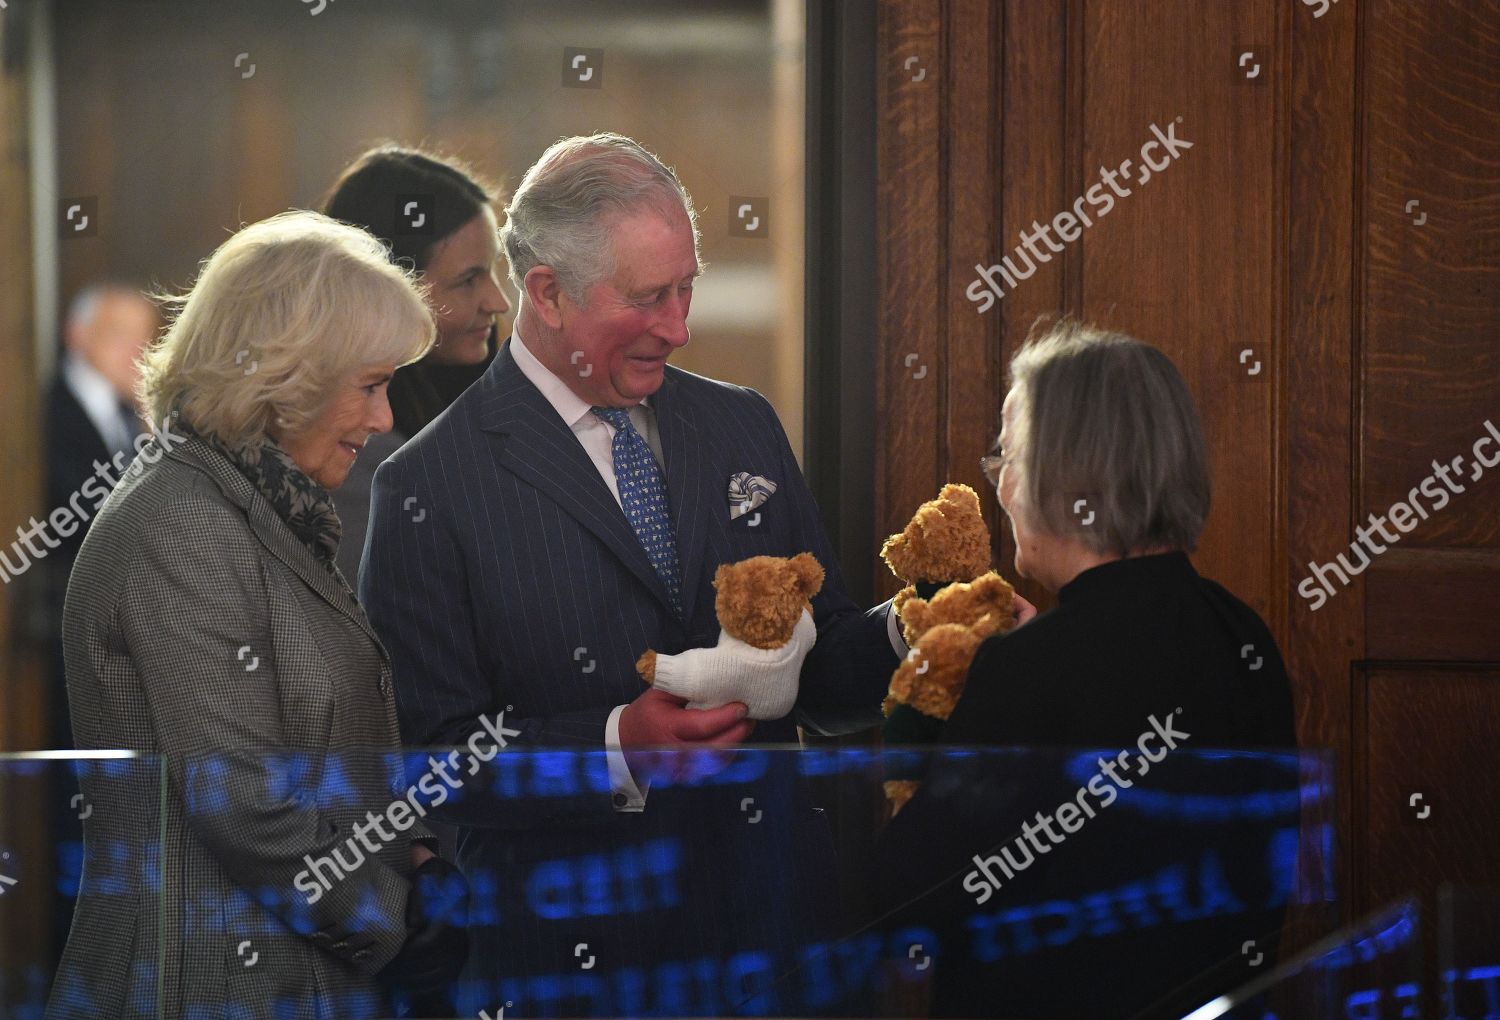 prince-charles-and-camilla-duchess-of-cornwall-visit-to-the-supreme-court-london-uk-shutterstock-editorial-10088612k.jpg